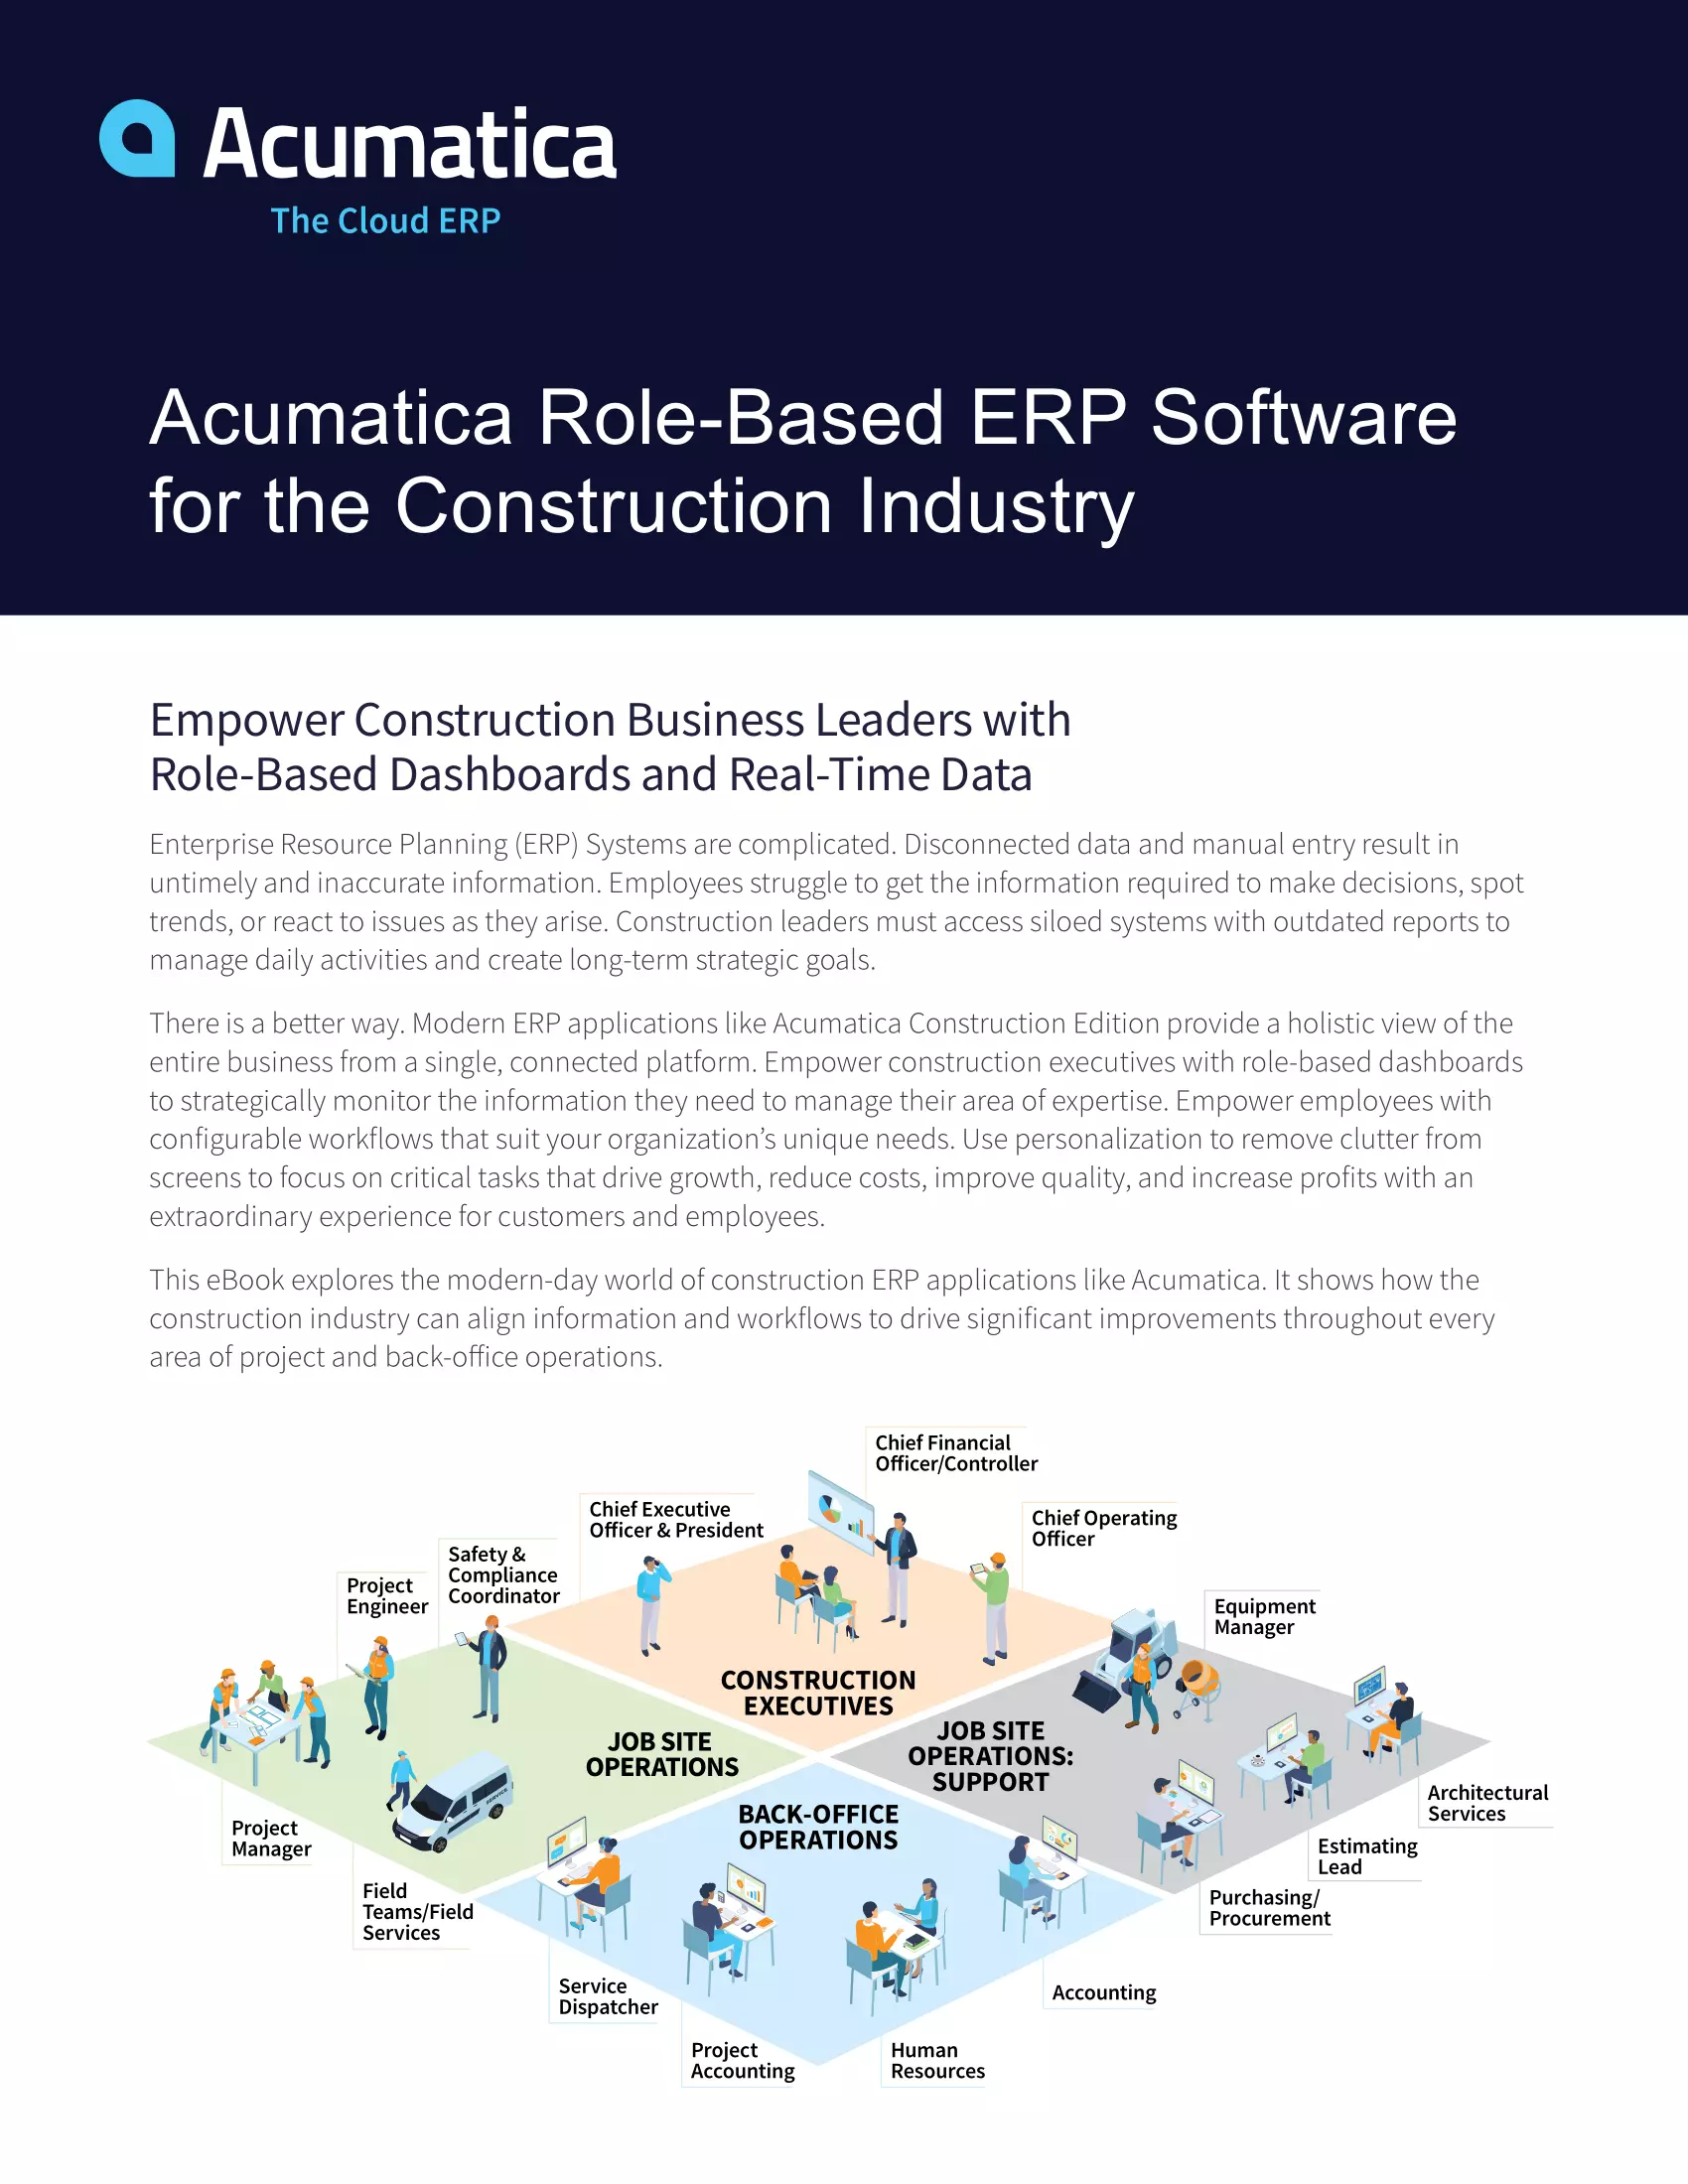 All Construction Roles, One Construction ERP Solution